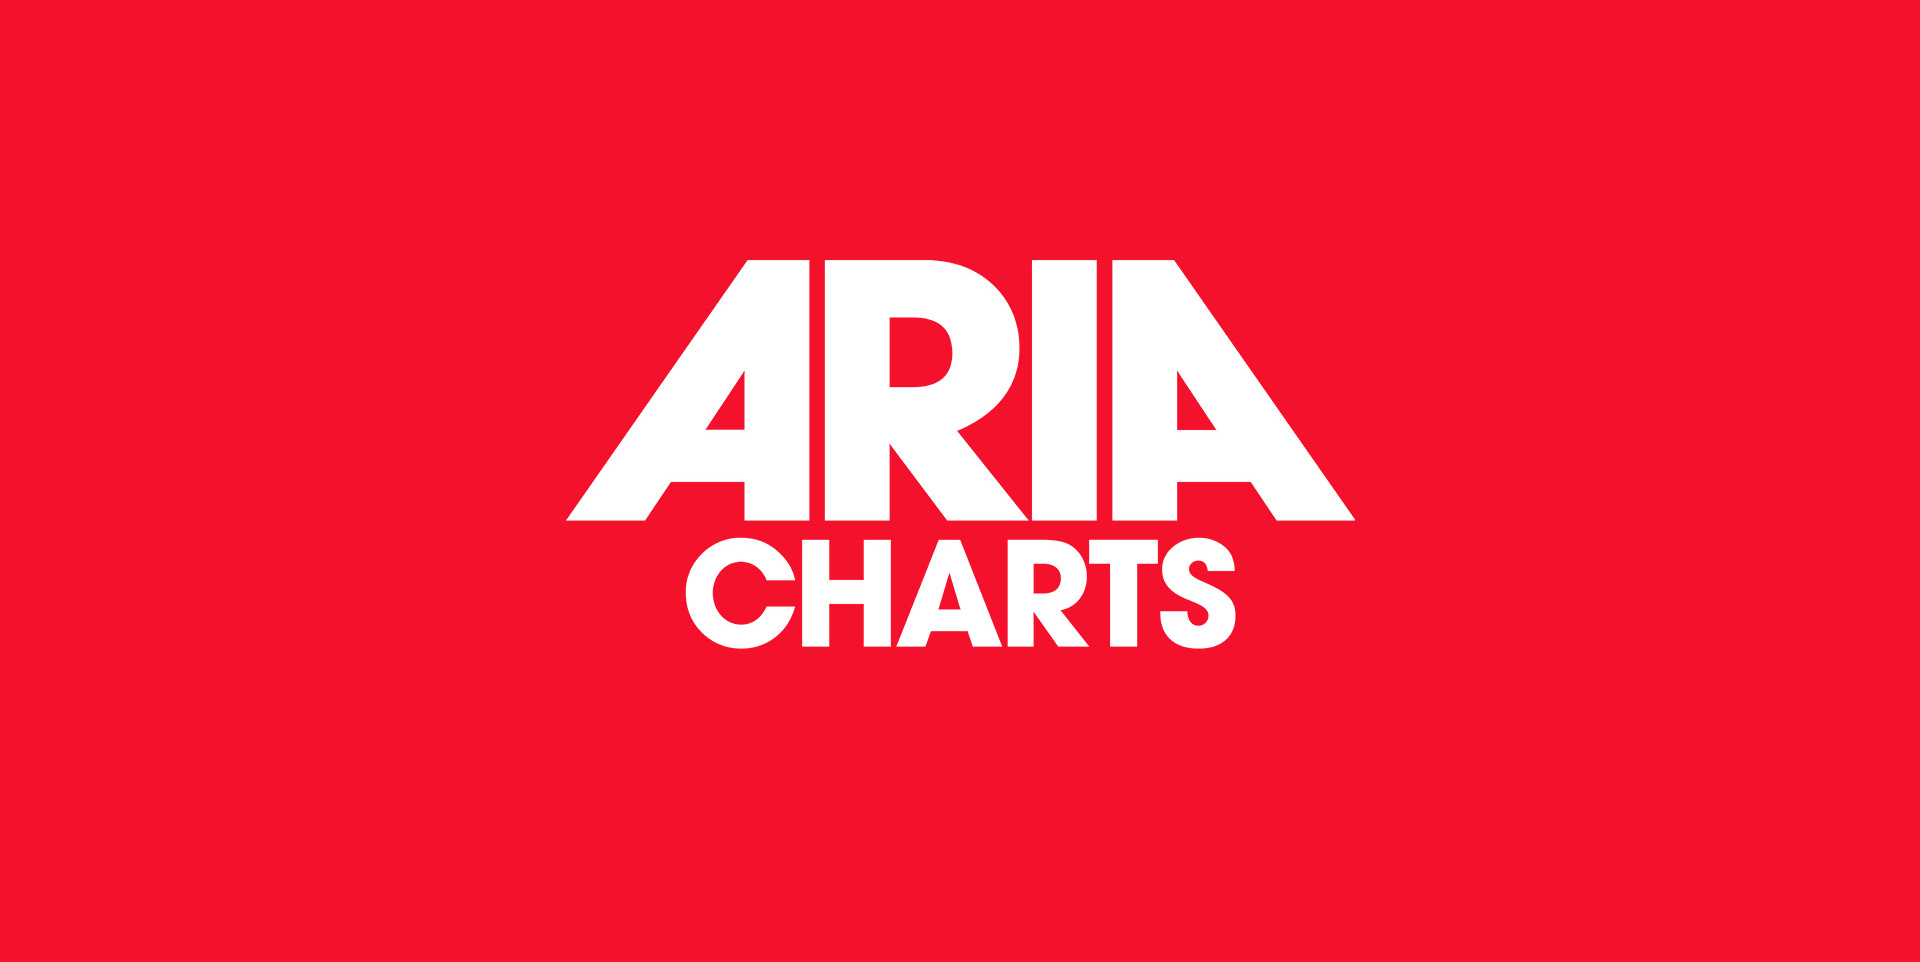 ARIA’s Ian Wallace Talks Origins, Evolution and Future of Australia’s Charts: ‘We Are Not There Yet’